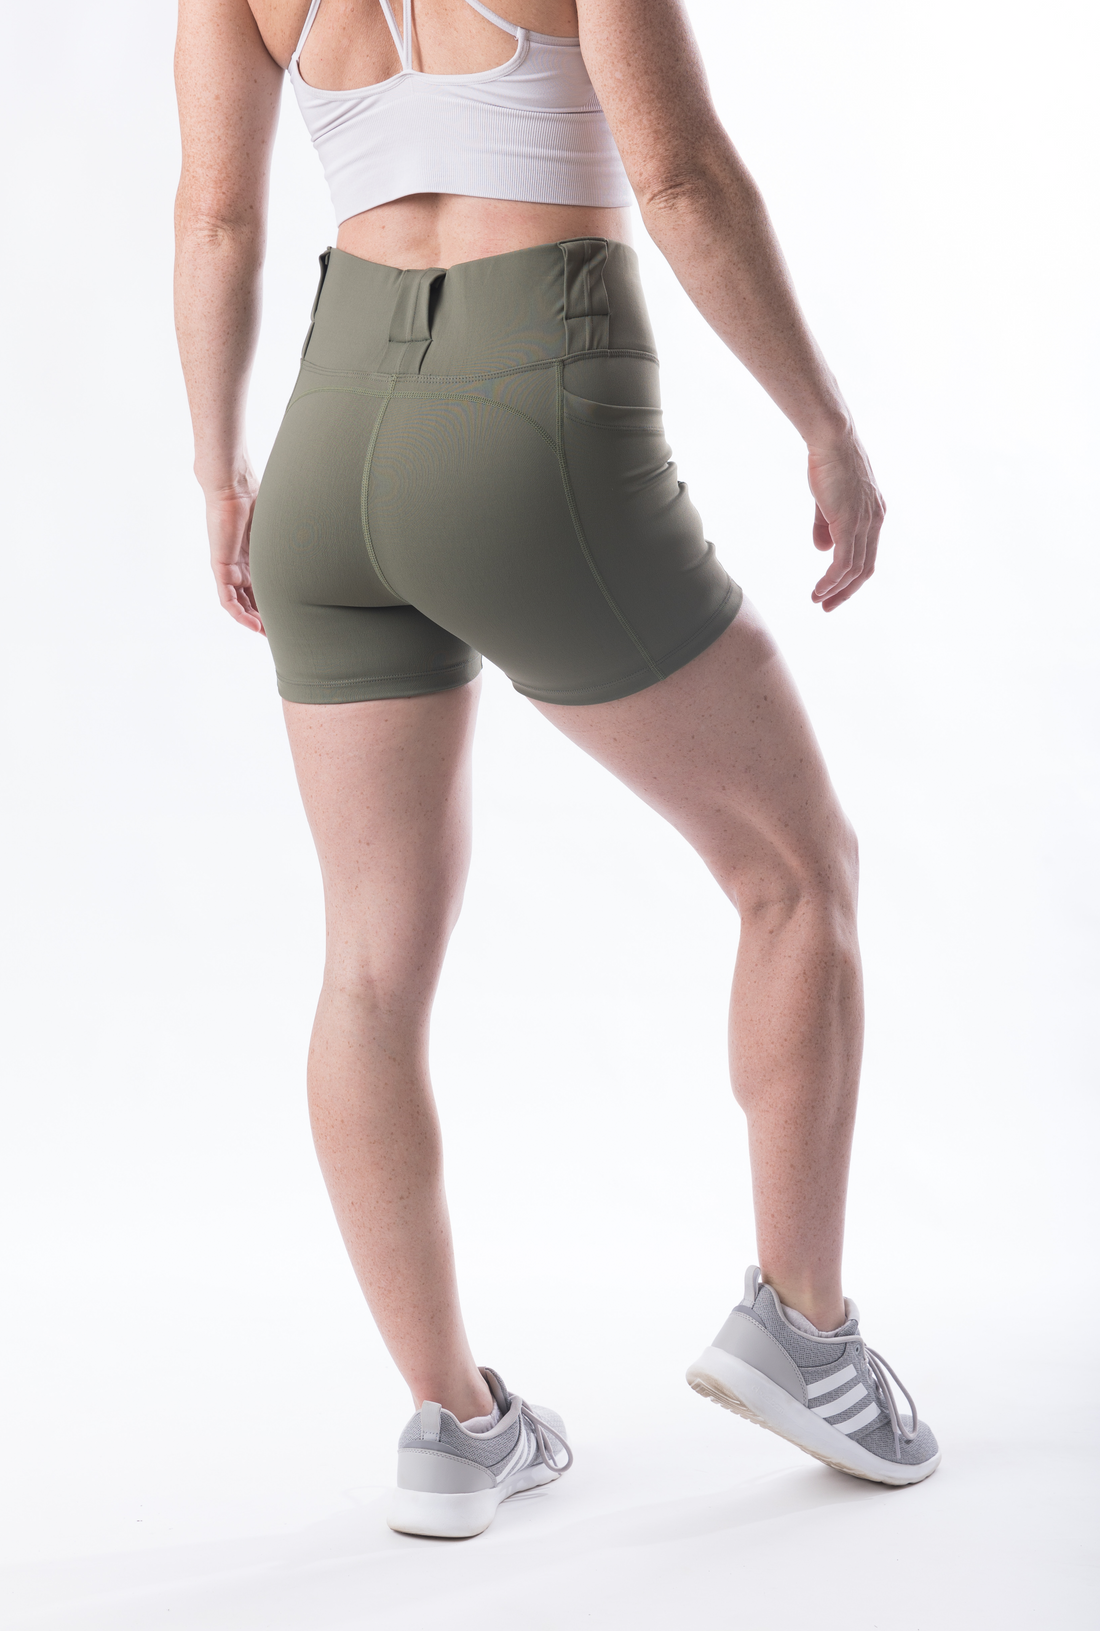 NEW Women's High Rise Curvy Carry Shorts, 3" inseam - Olive